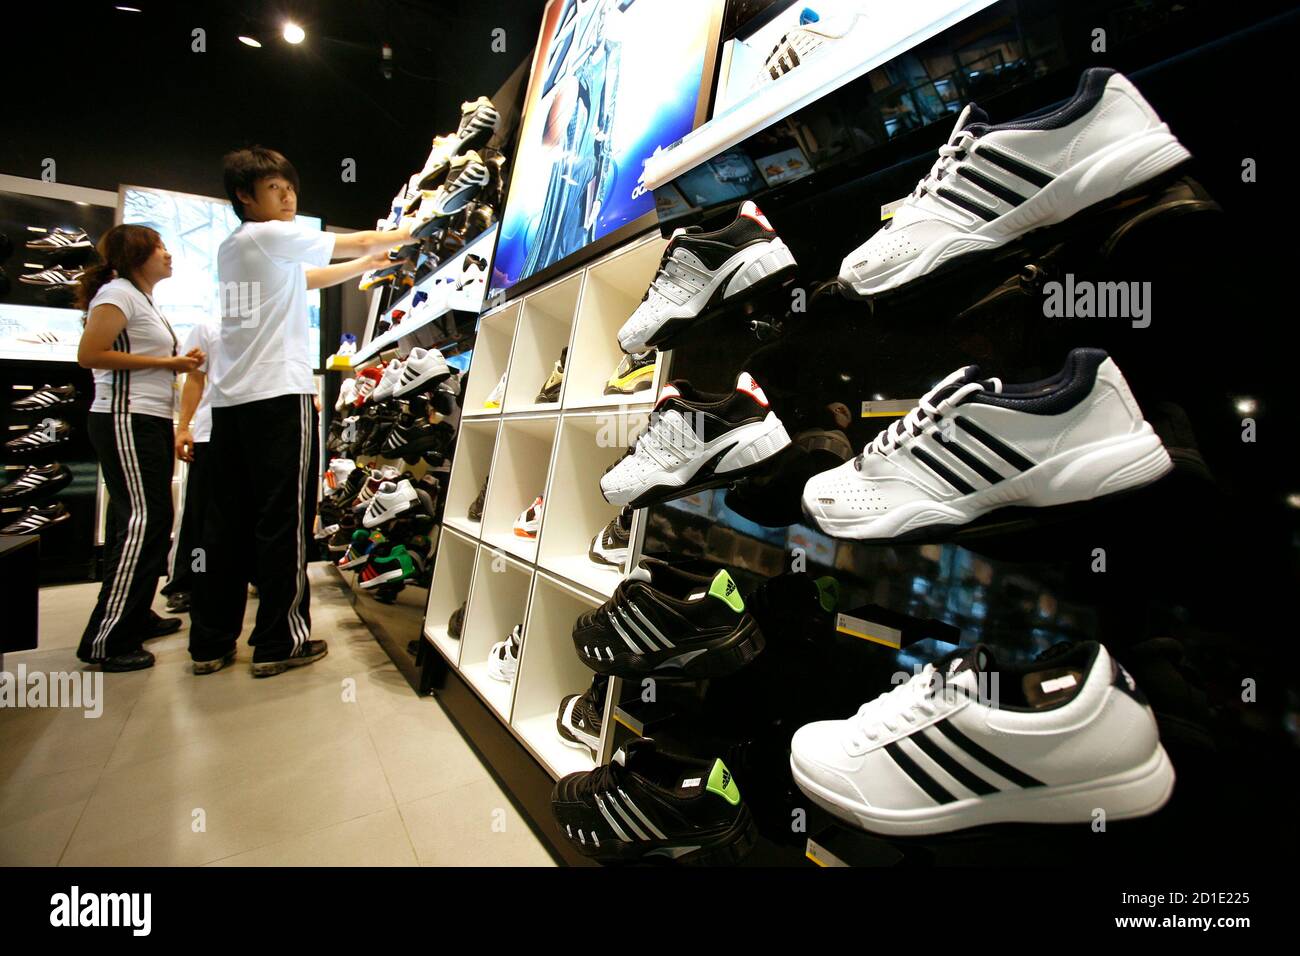 Staff arrange shoes at the new and world's largest Adidas Brand Center store  in Beijing July 3, 2008. Adidas will open its world's largest Adidas store  with a size of 3,170 square